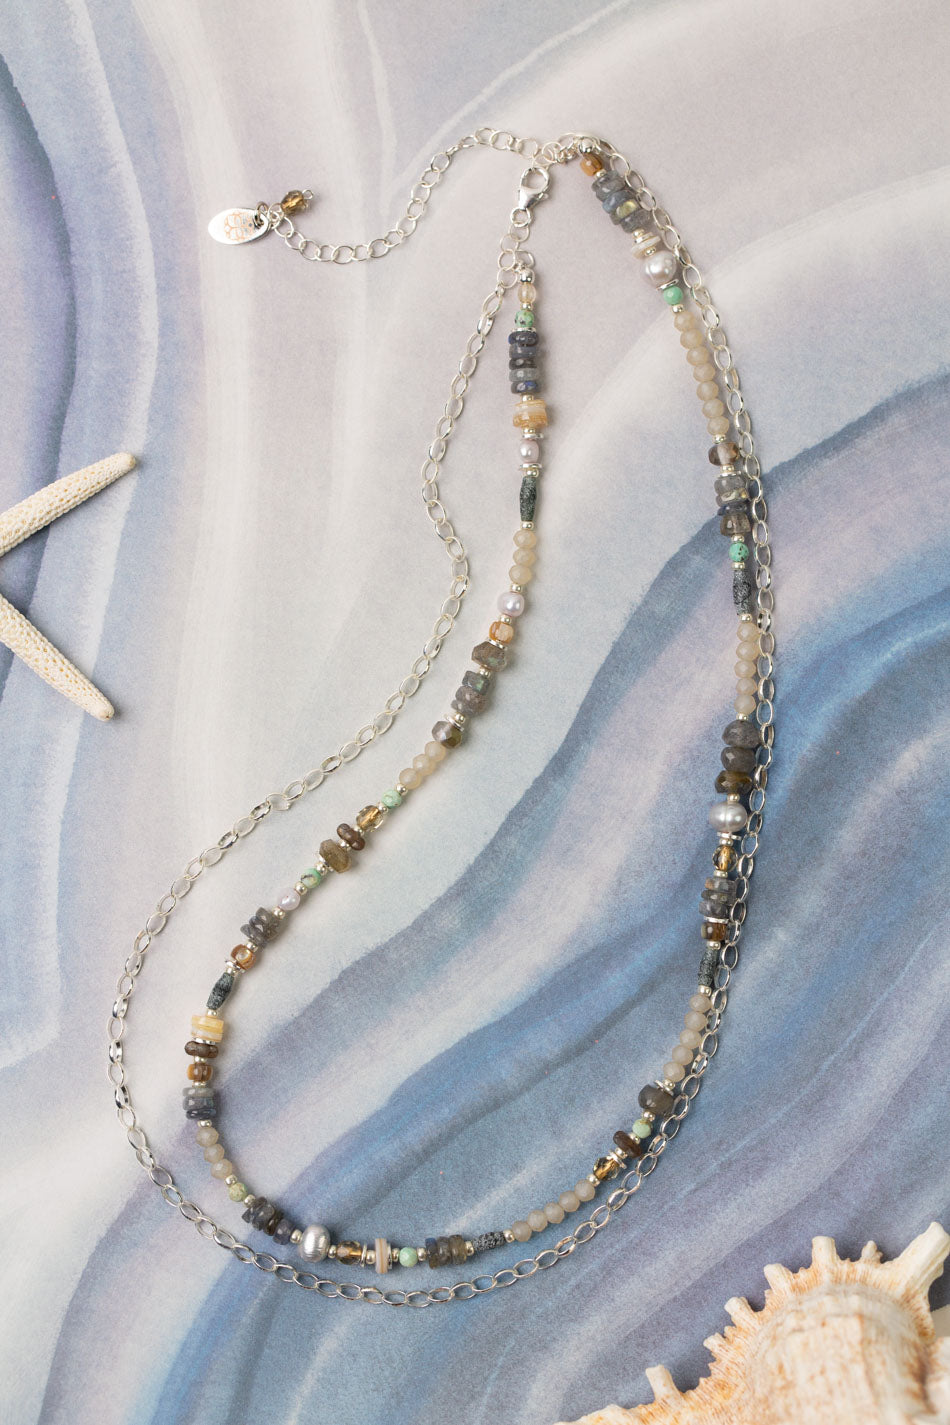 Mystic 18-20" Abalone And Freshwater Pearl Multistrand Necklace